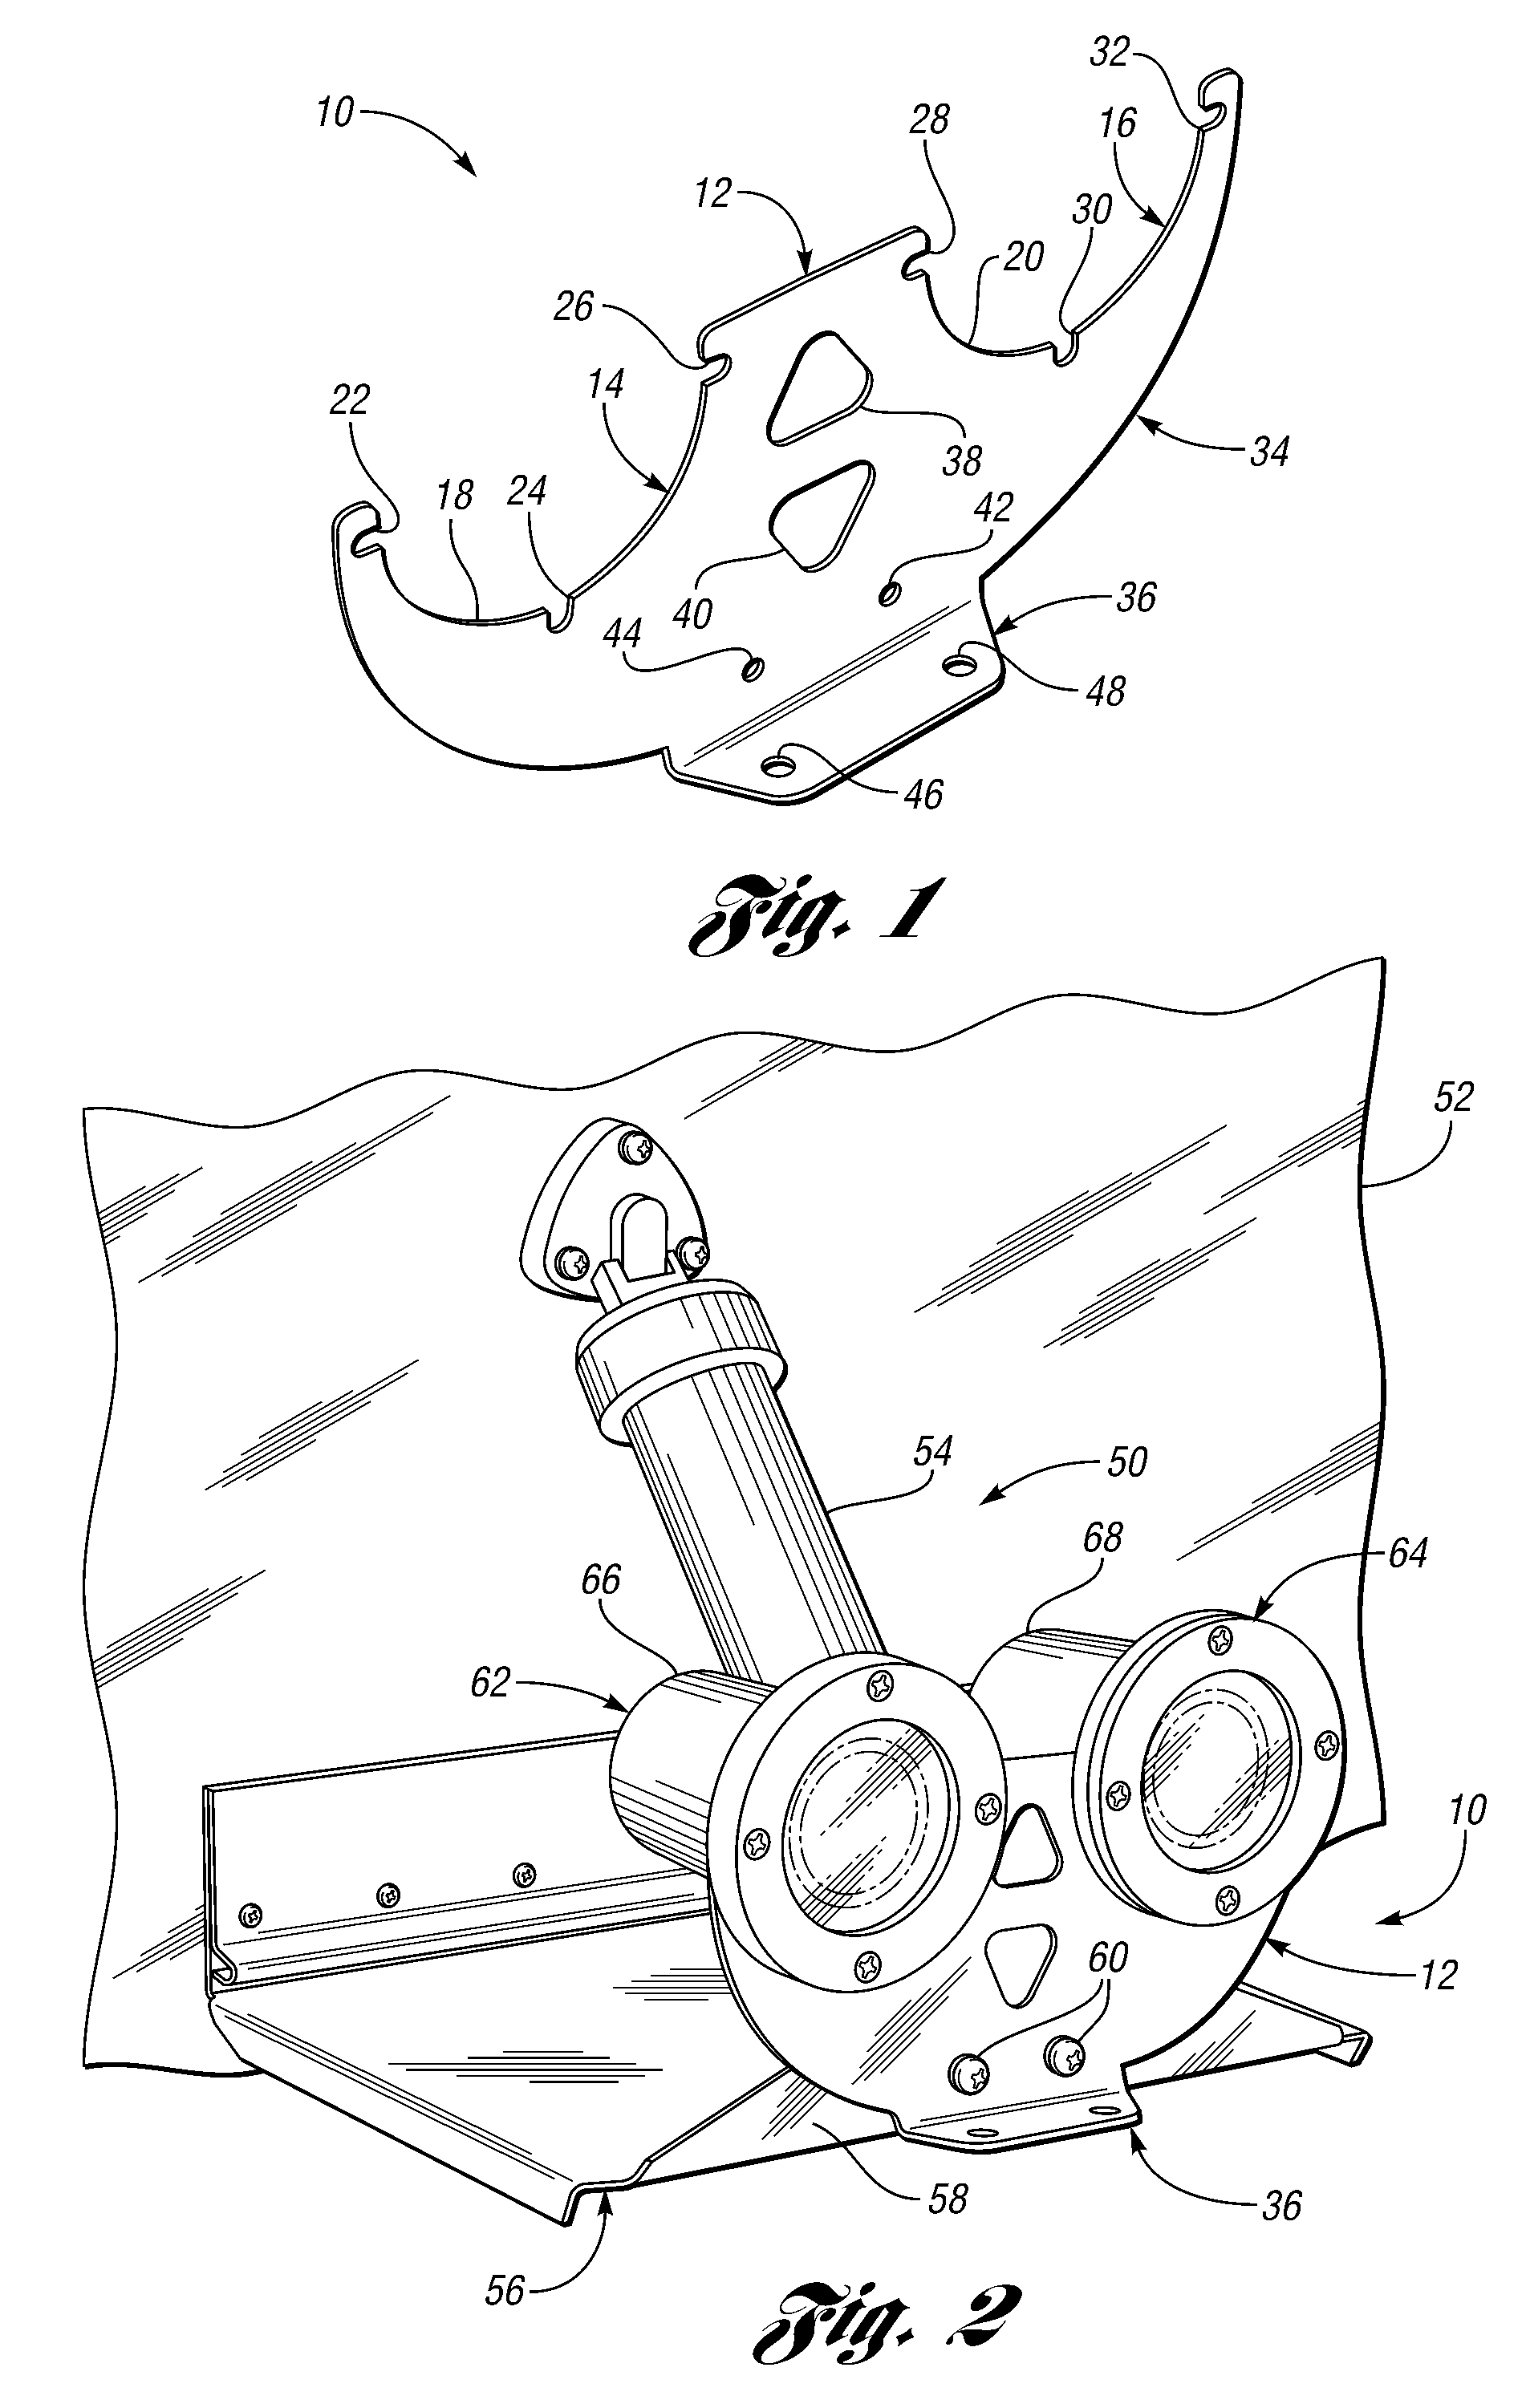 Marine light mounting system and method for producing same